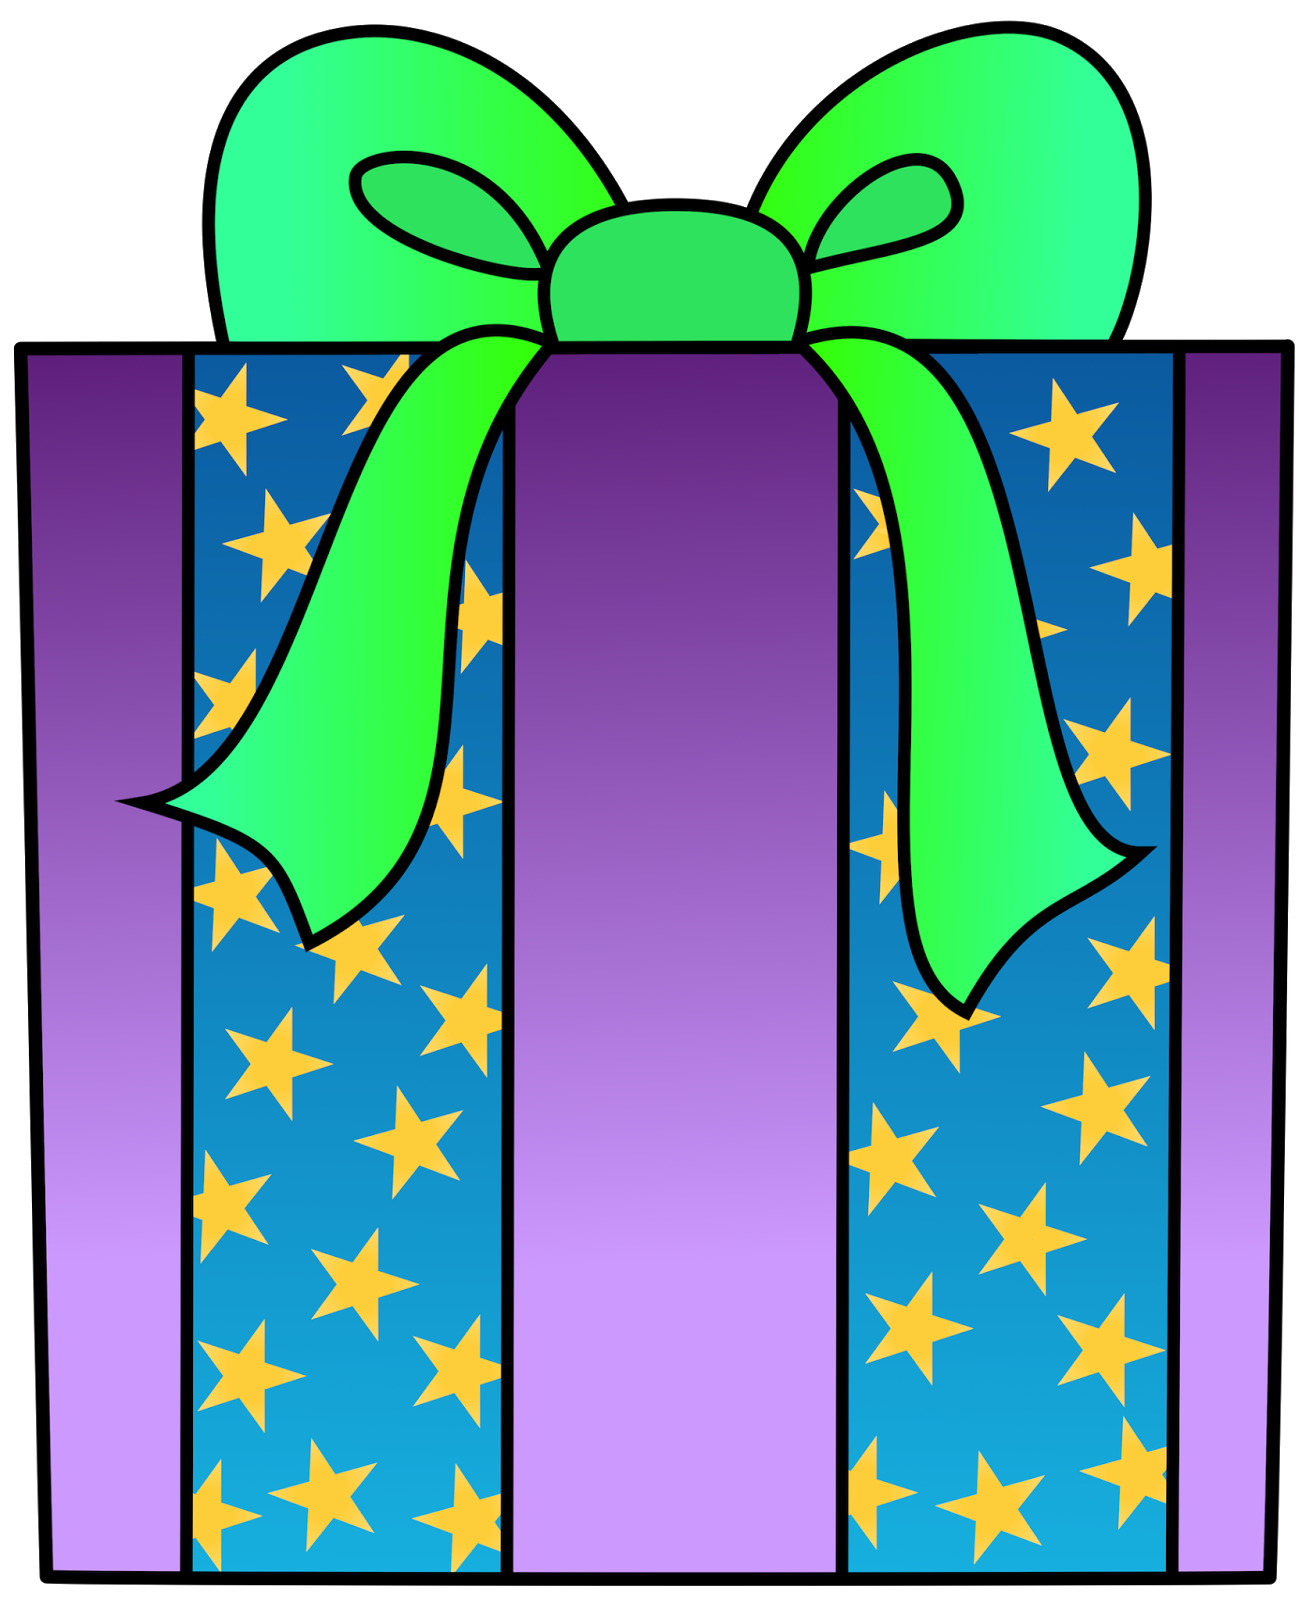 Happy Birthday Present Clipart - Free Clipart Images